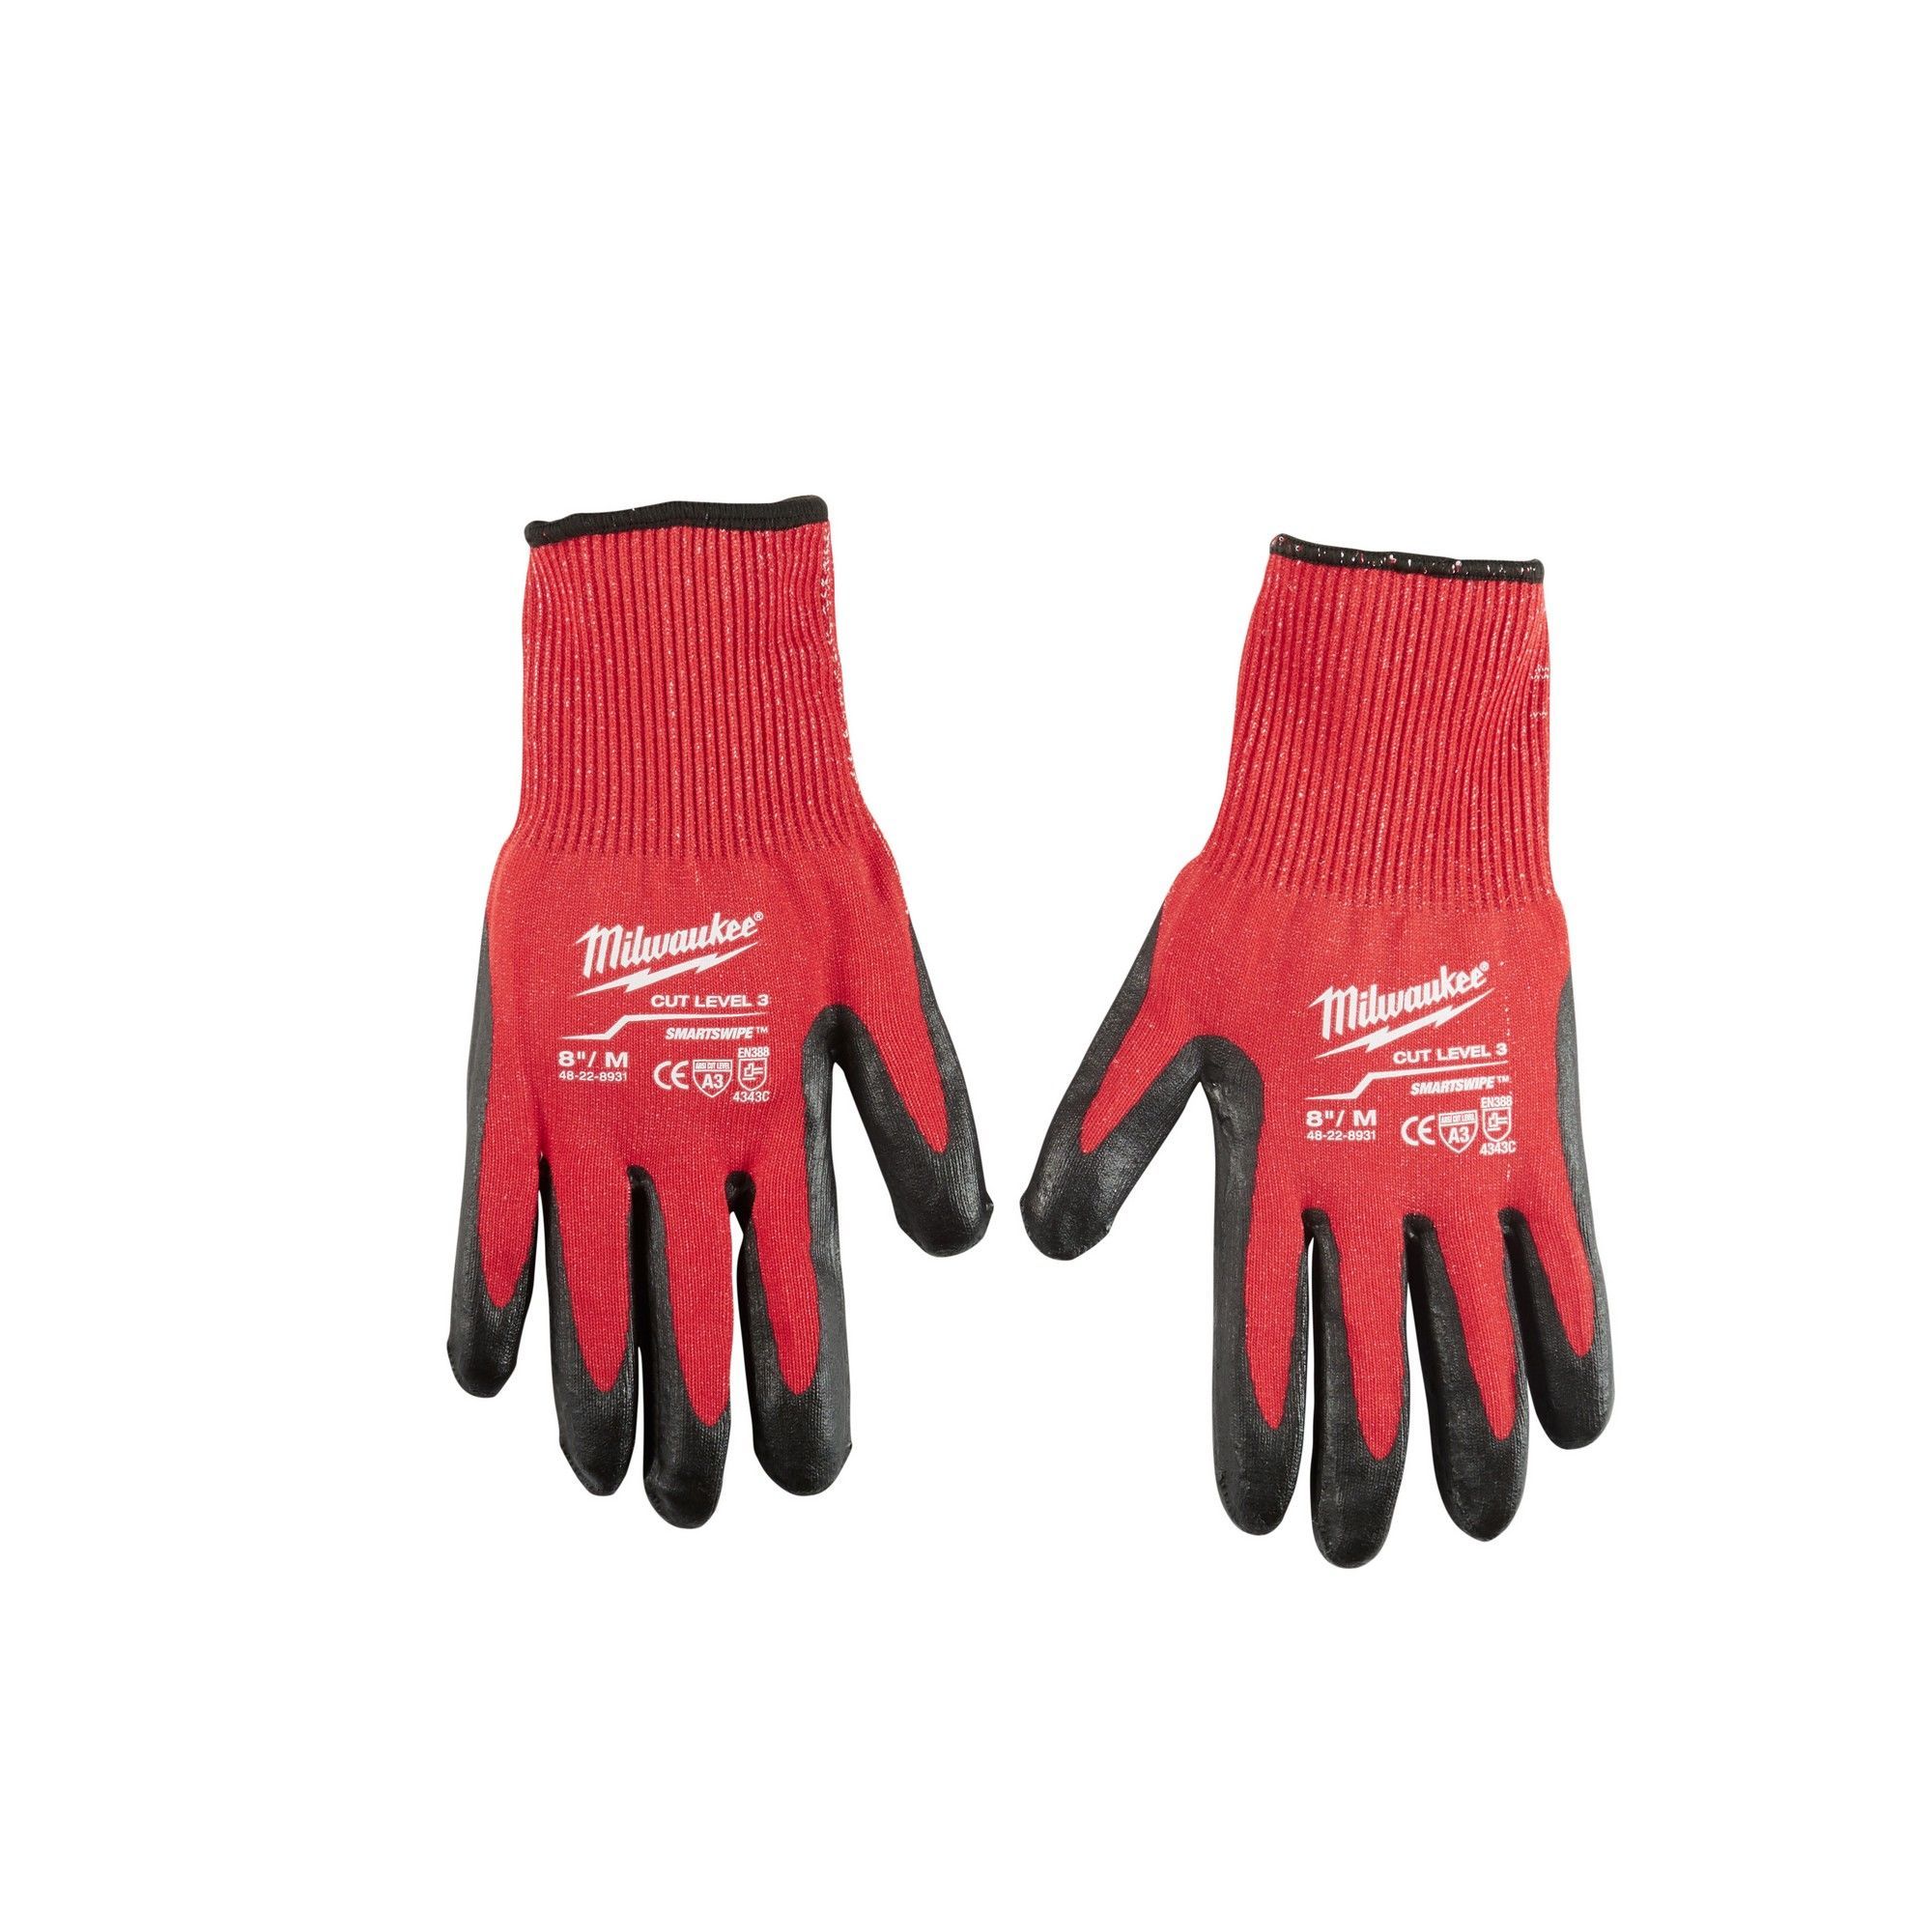 Nitrile Level 3 Cut Dipped Work Gloves - Size Medium from MILWAUKEE